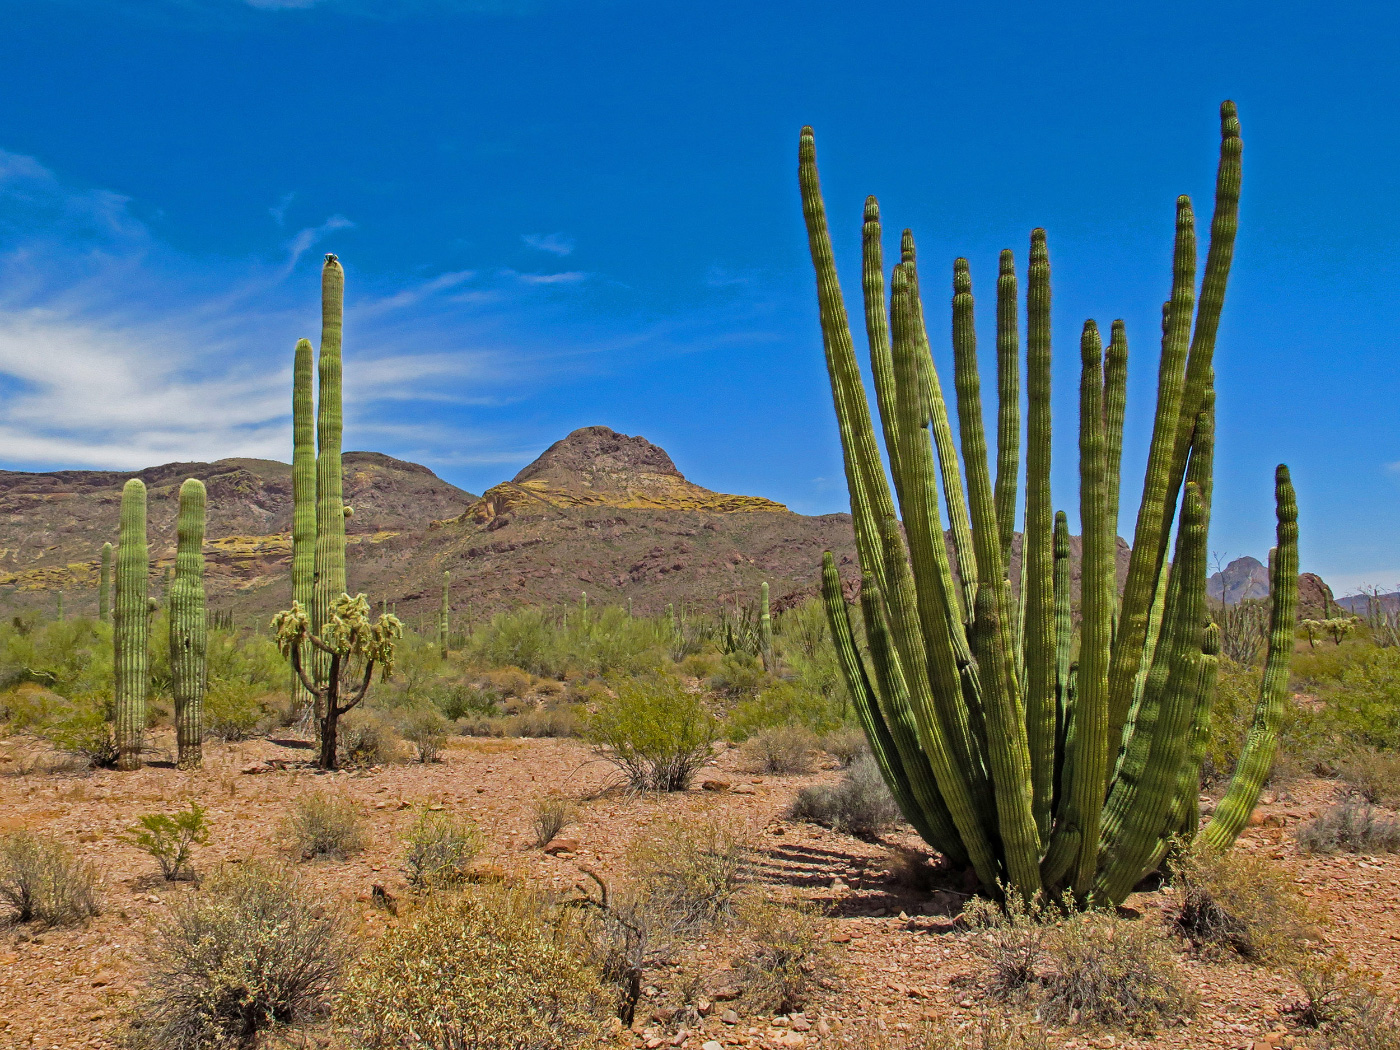 Cacti in a desert, part of the endangered Organ Pipe Cactus National Monument